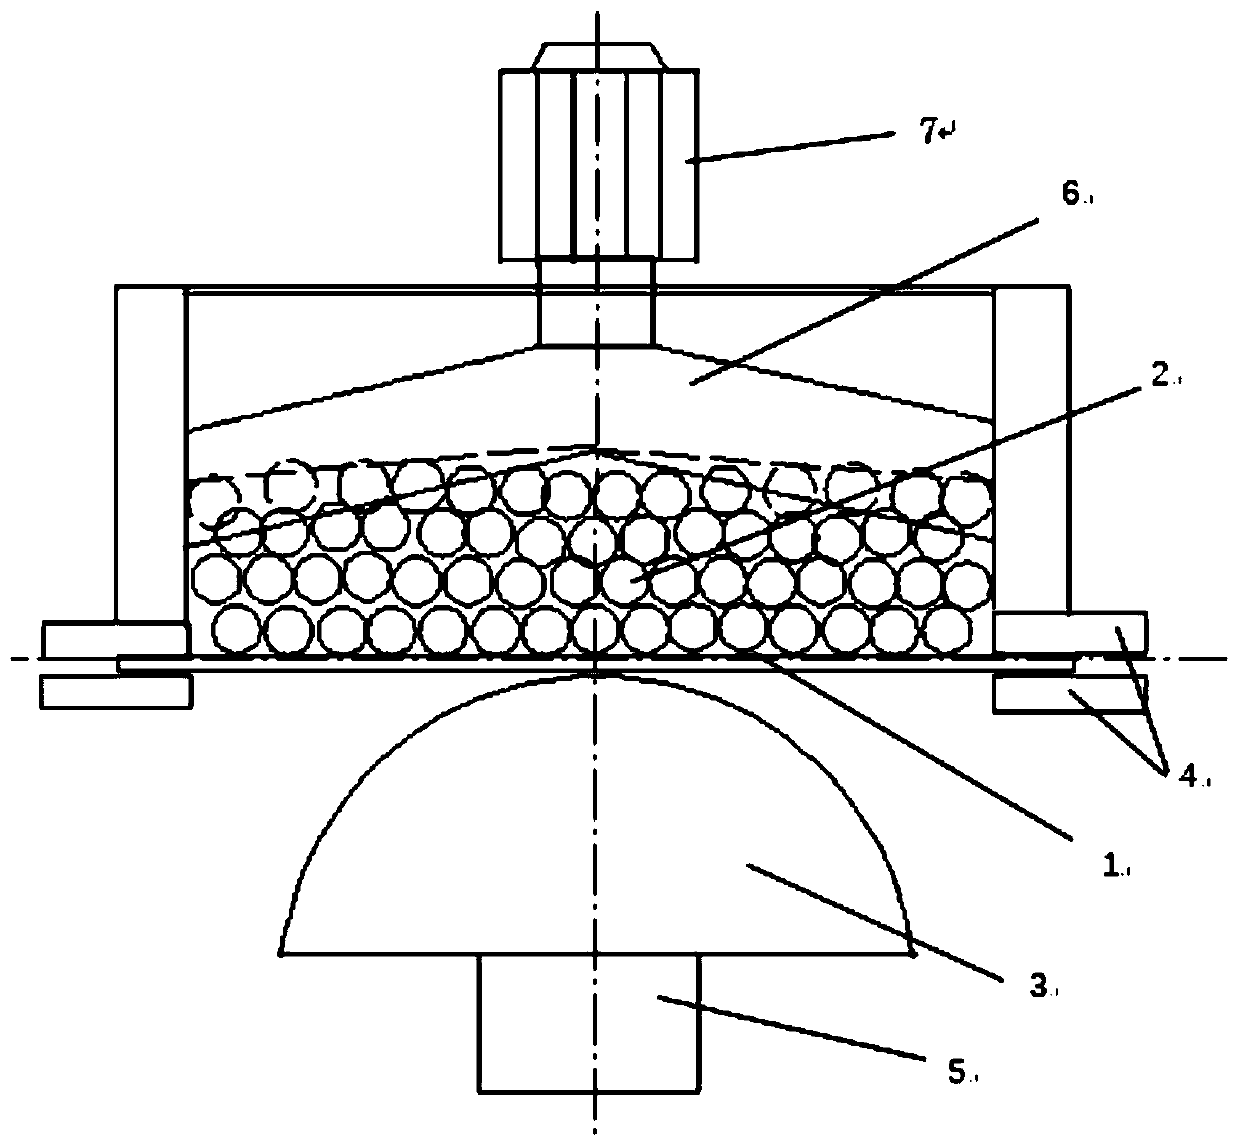 A Forming Process for Uniform Spinning of Titanium Alloy Sheet by Cluster Steel Ball Half-mold